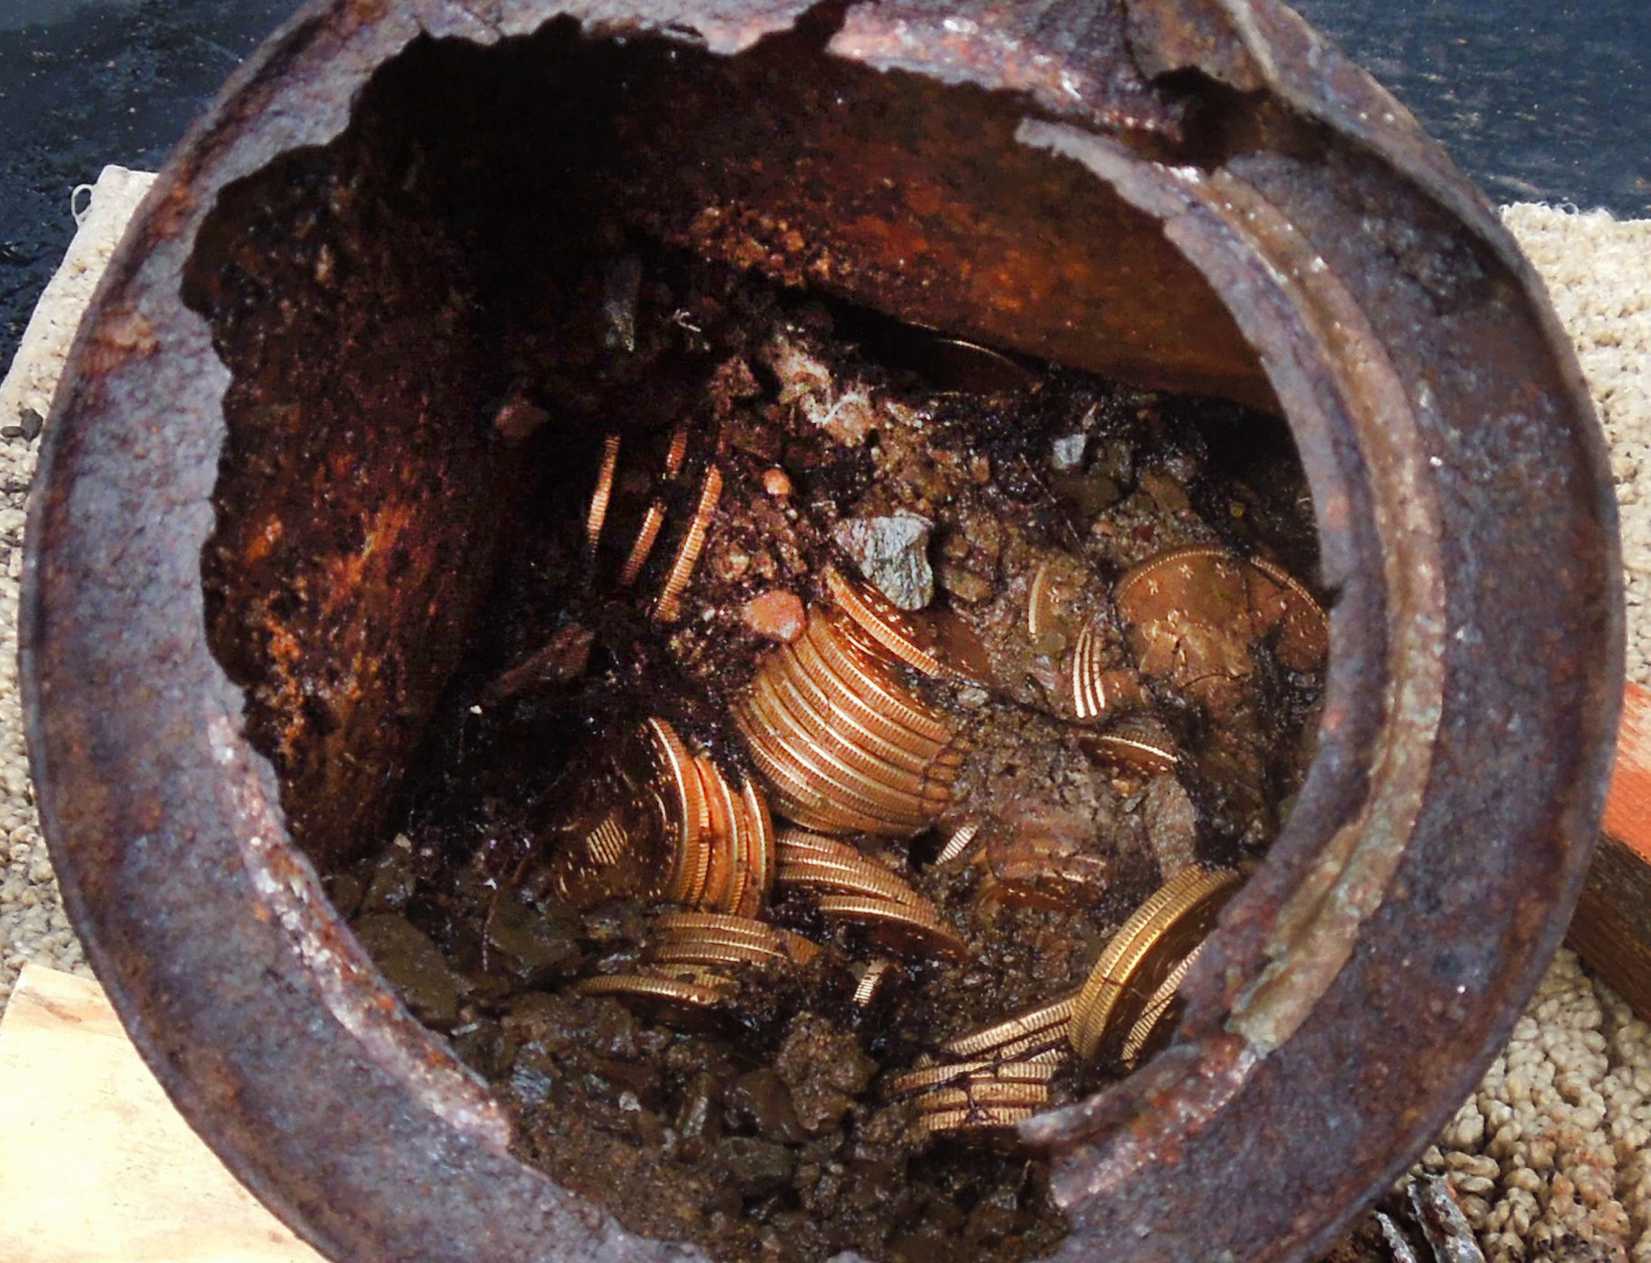 This image provided by the Saddle Ridge Hoard discoverers via Kagin's, Inc., shows one of the six decaying metal canisters filled with 1800s-era U.S. gold coins unearthed in California by two people who want to remain anonymous. (Saddle Ridge Hoard discoverers via Kagin's, Inc. / AP Photo)